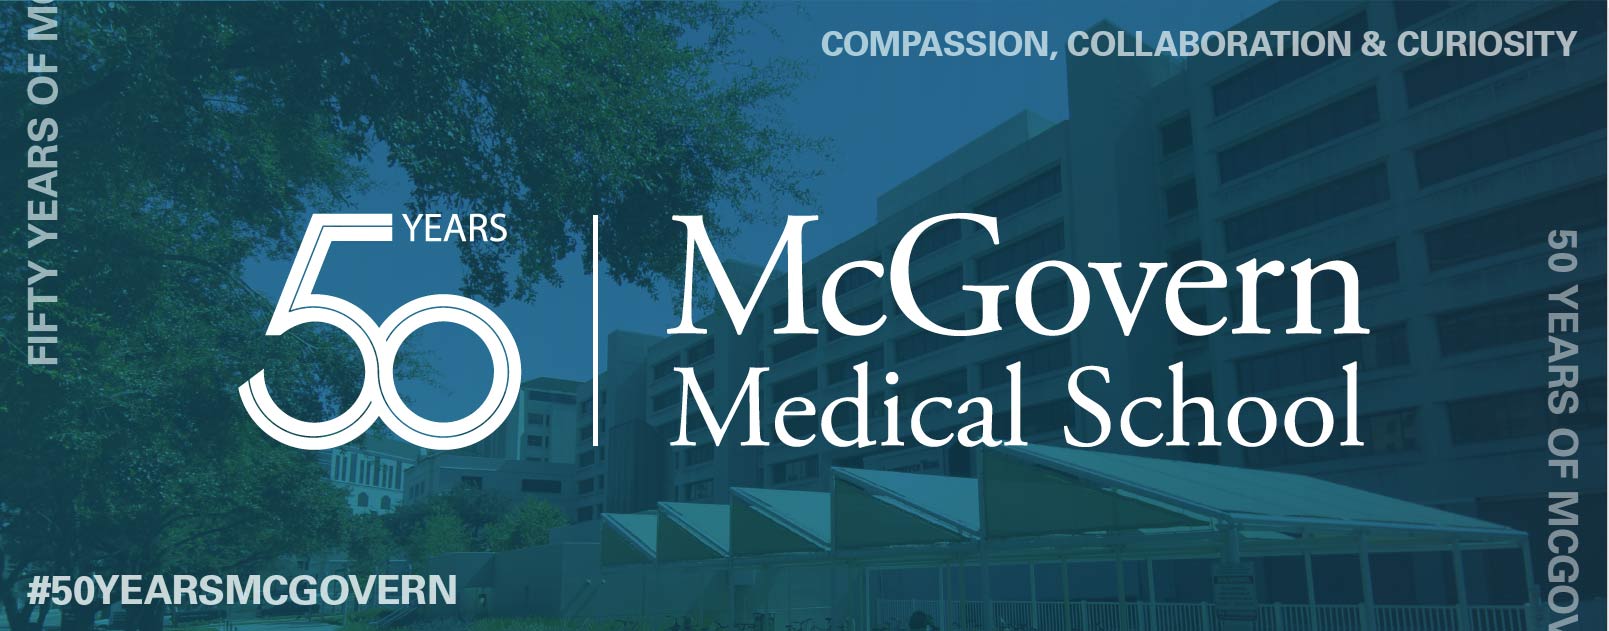 50 Years at McGovern medical school banner